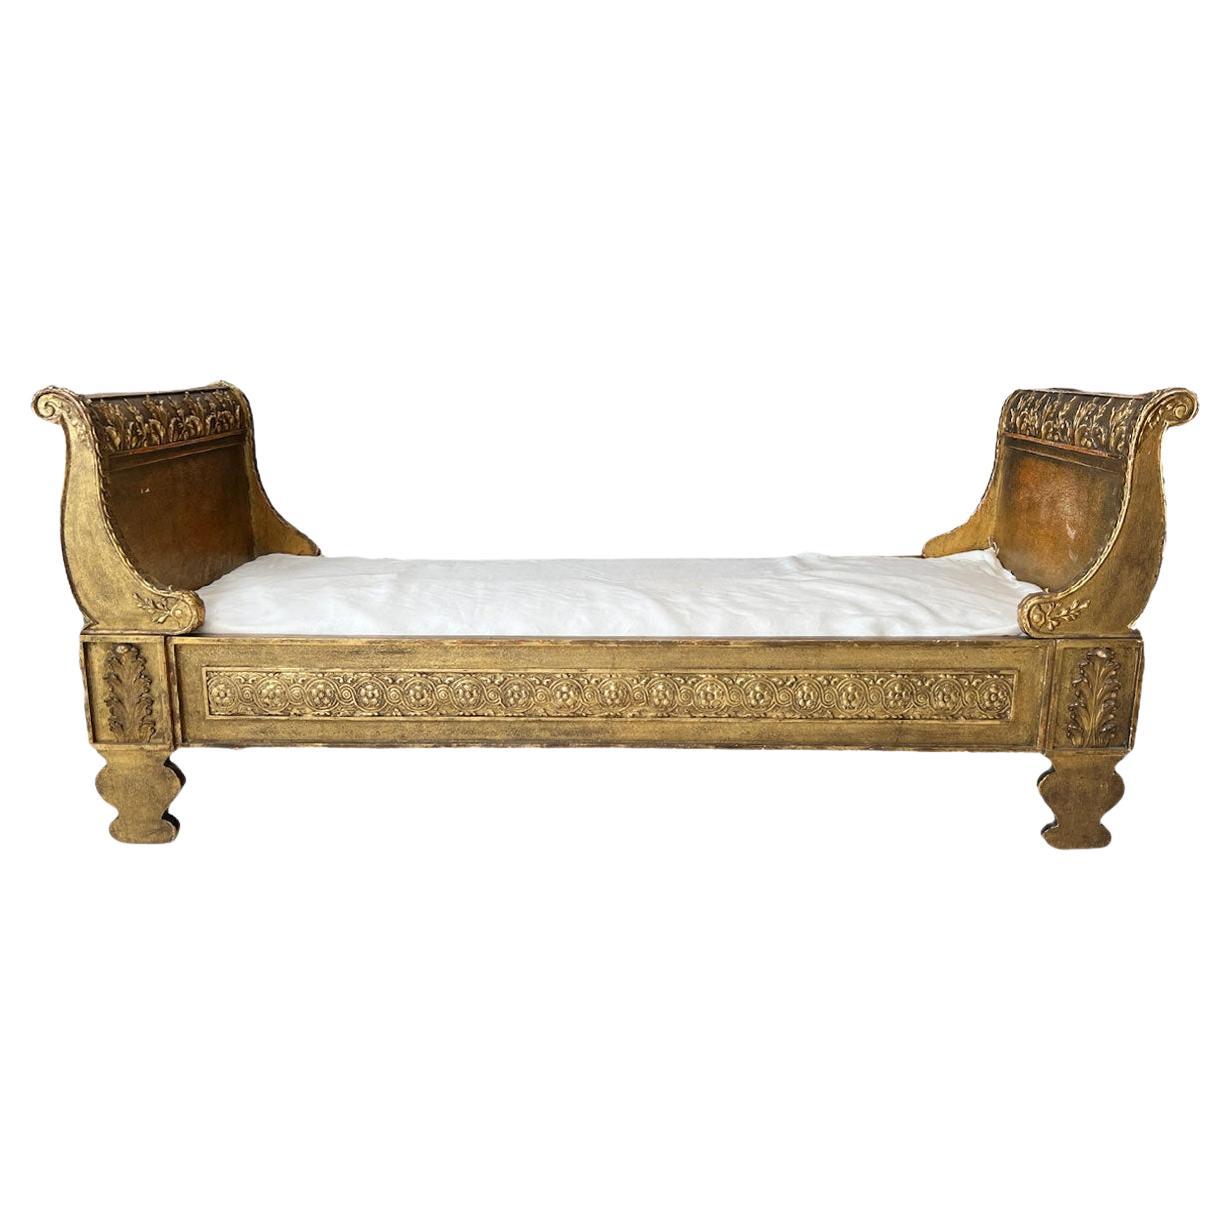 Empire Style Gilded Daybed, 19th Century